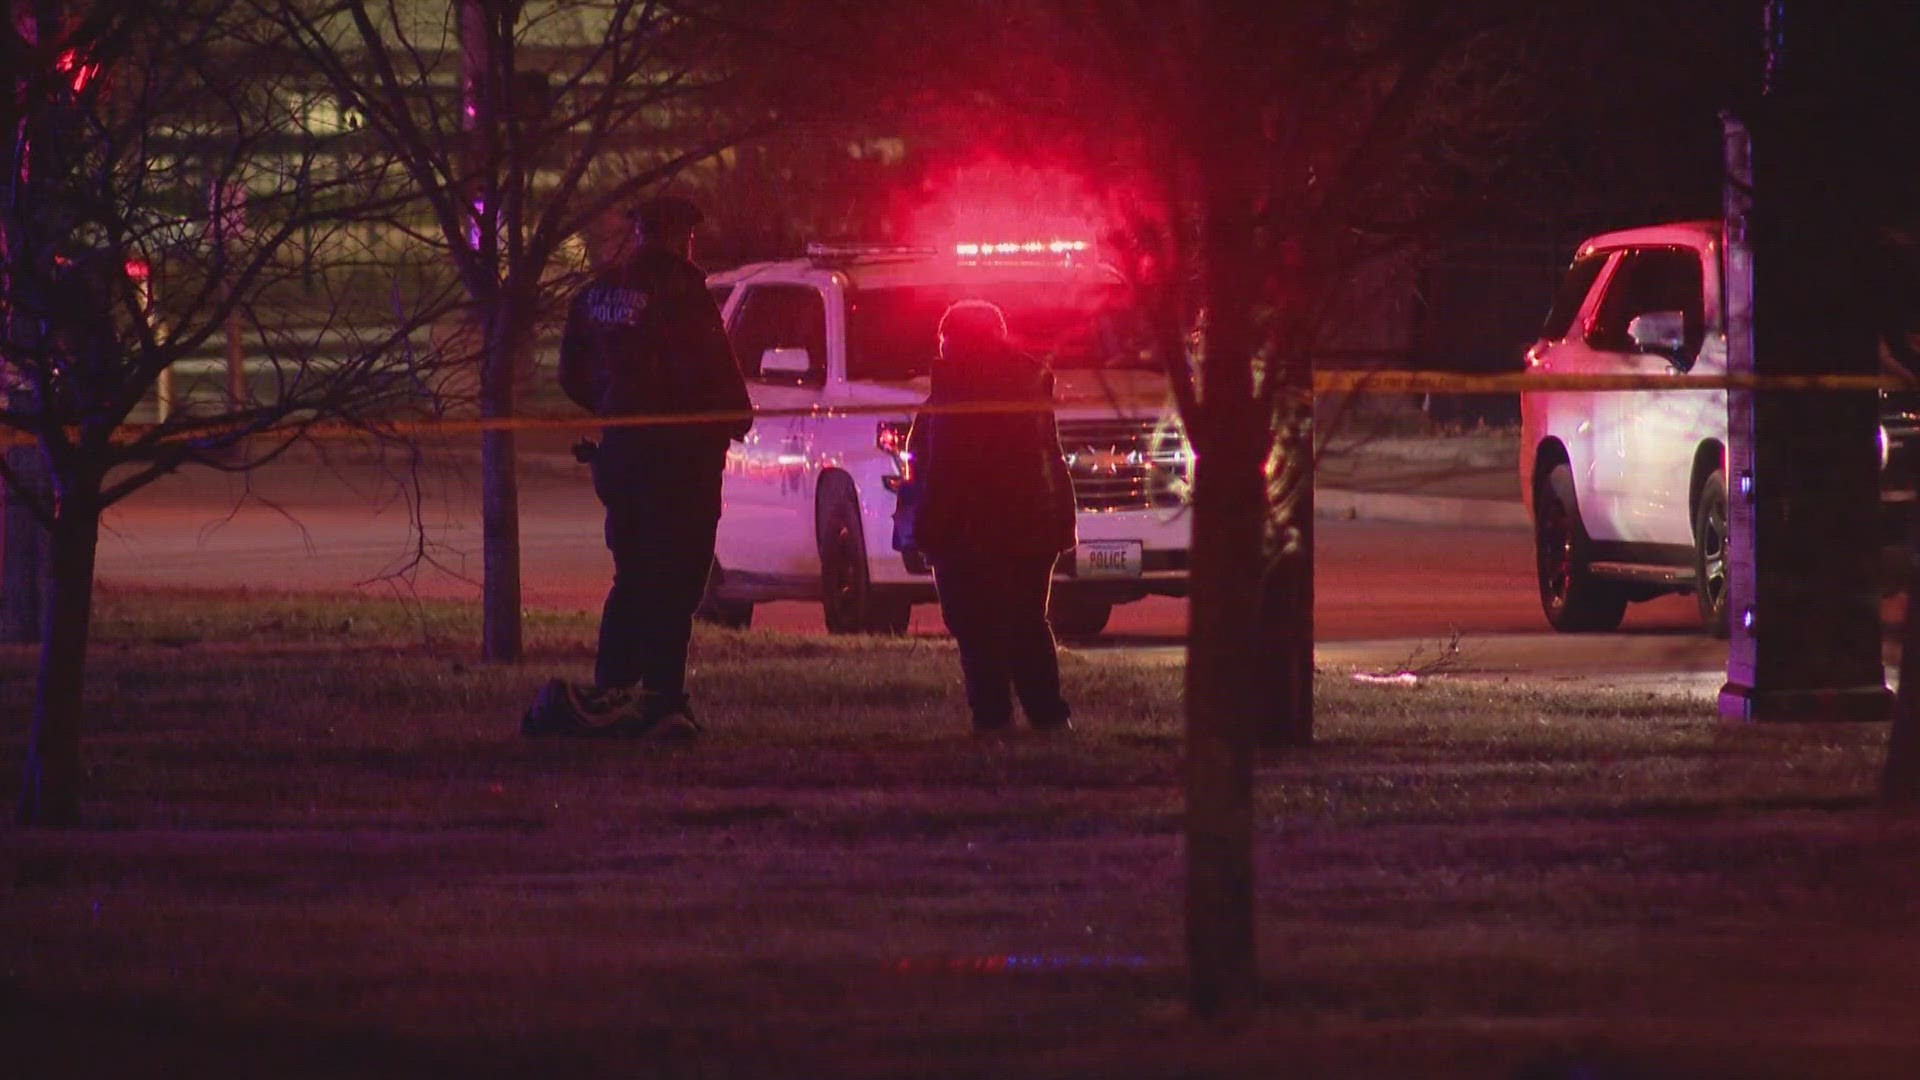 The St. Louis Metropolitan Police Department said officers responded to the shooting. It happened at around 6:45 p.m. on the 1000 block of Lasalle Park Court.